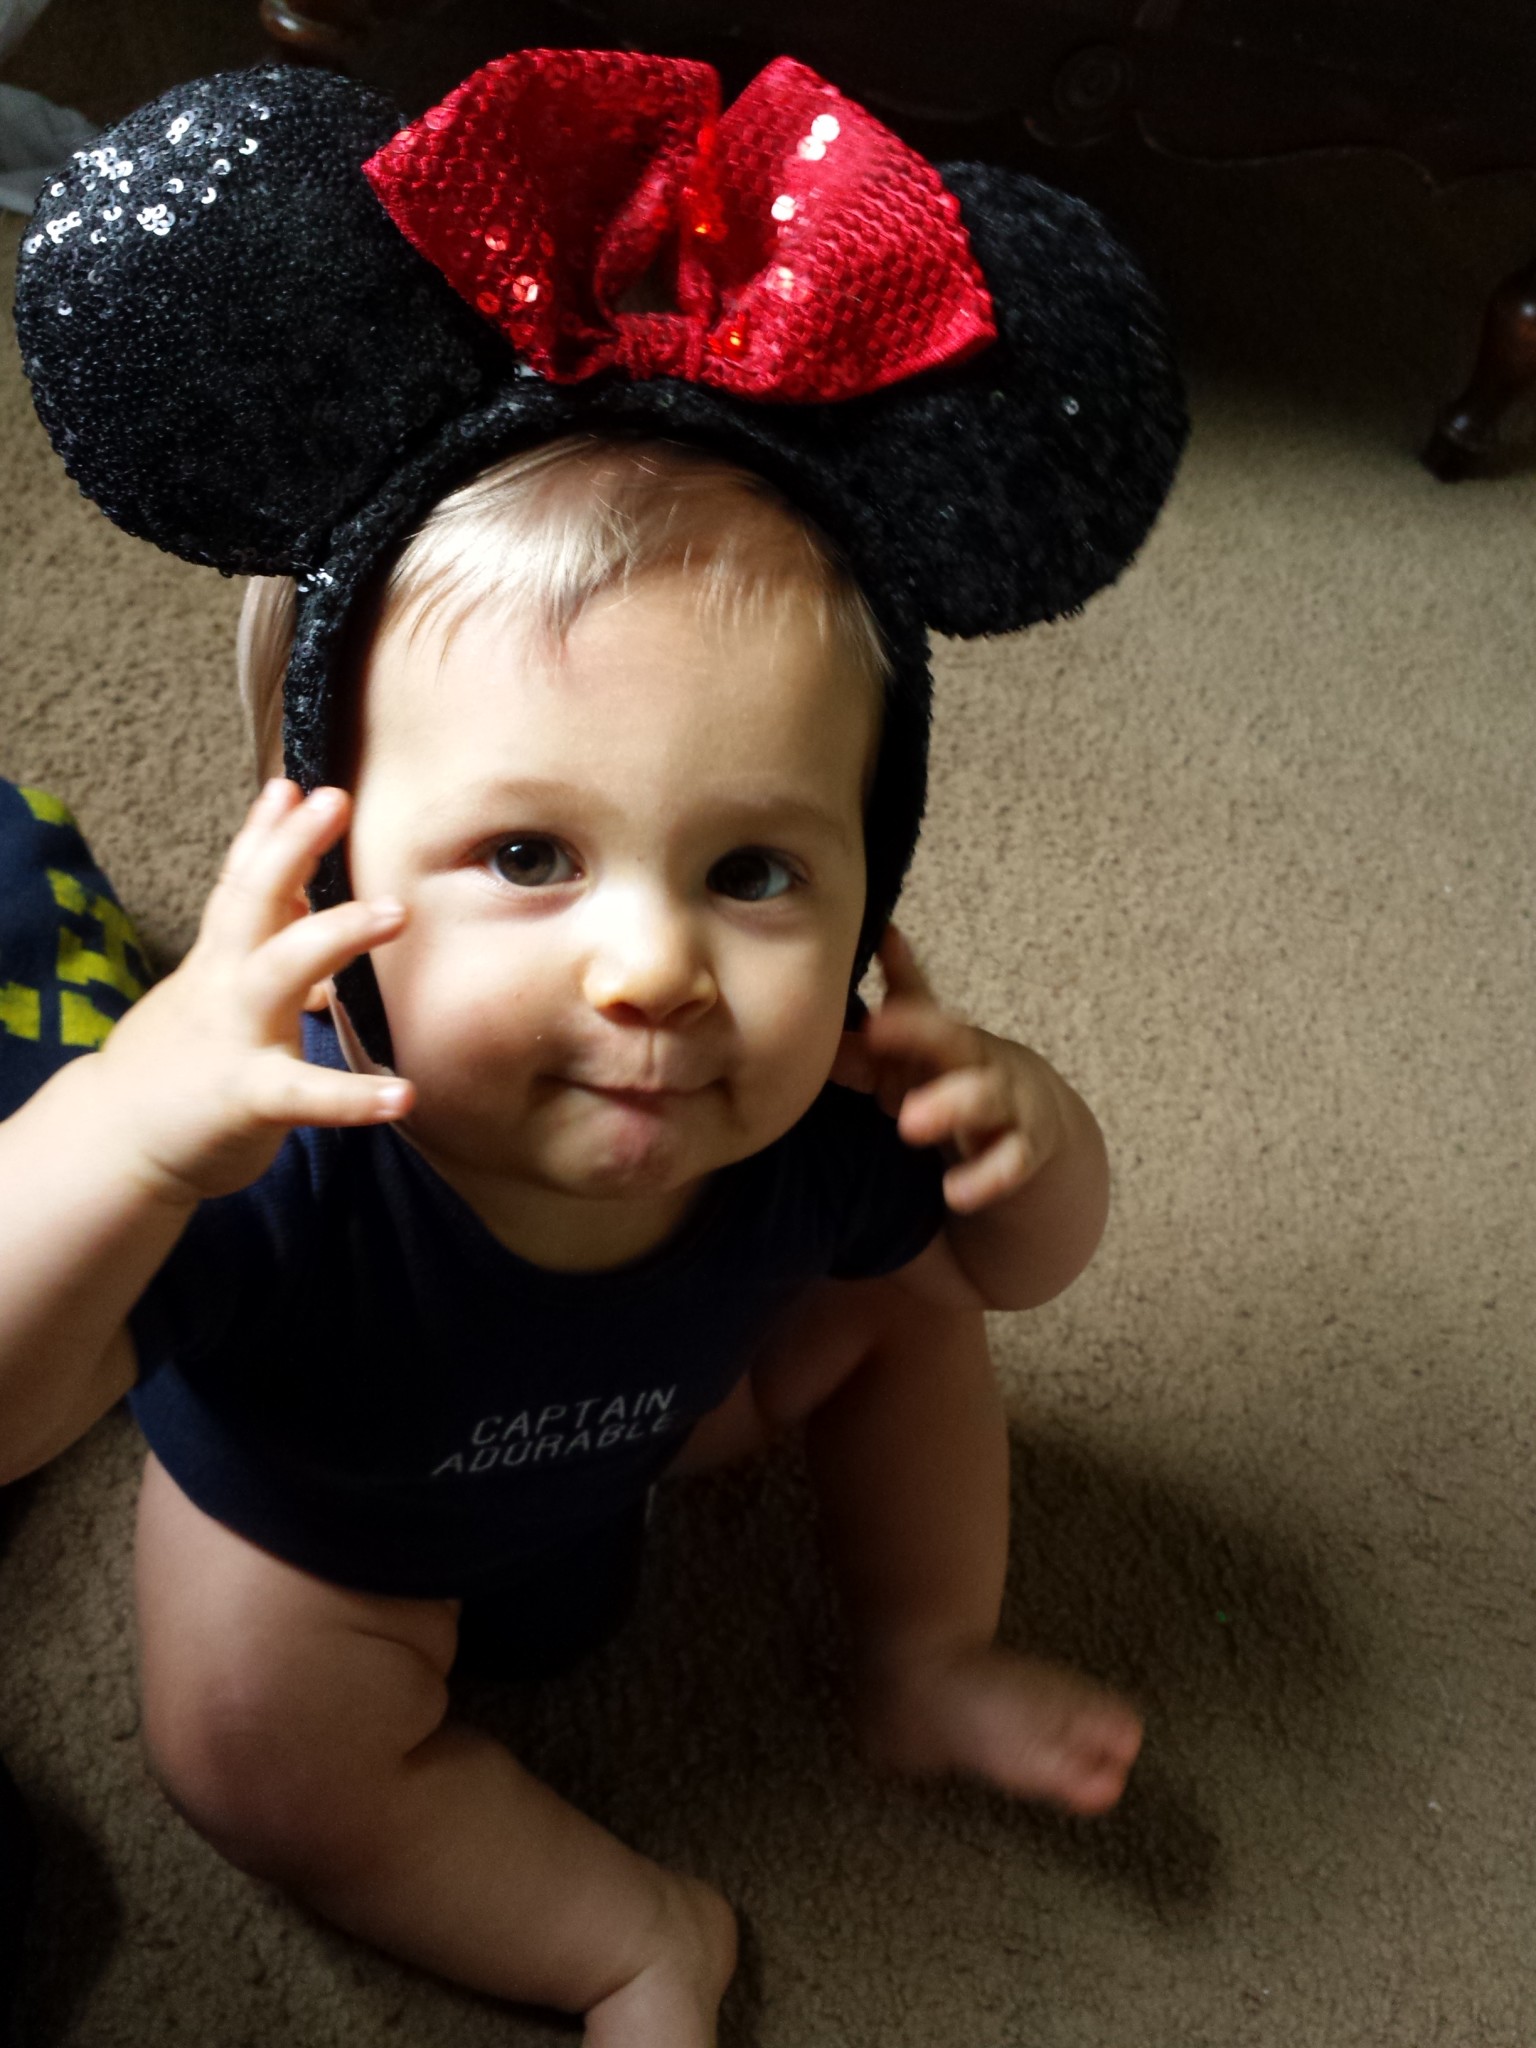 Traveling With an Infant To Walt Disney World